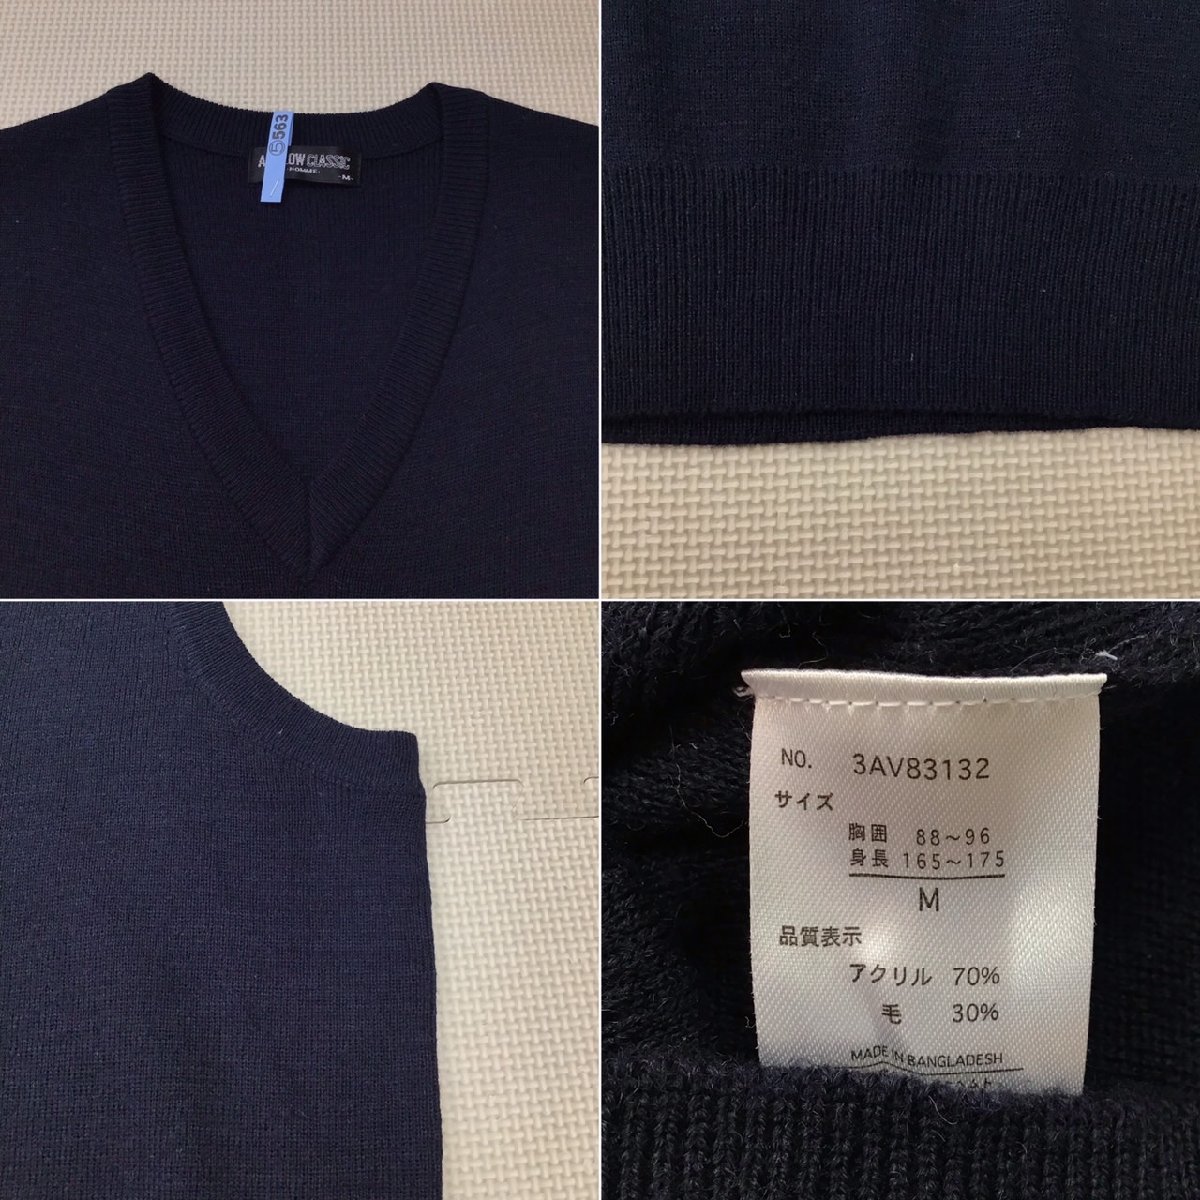 O298/T( used ) Tochigi direction uniform 2 point /. name unknown /M/ sweater / knitted the best /SELENE Clube/ALTBLOW CLASSIC/ winter / black / navy blue / school uniform /. industry raw goods / man and woman use 